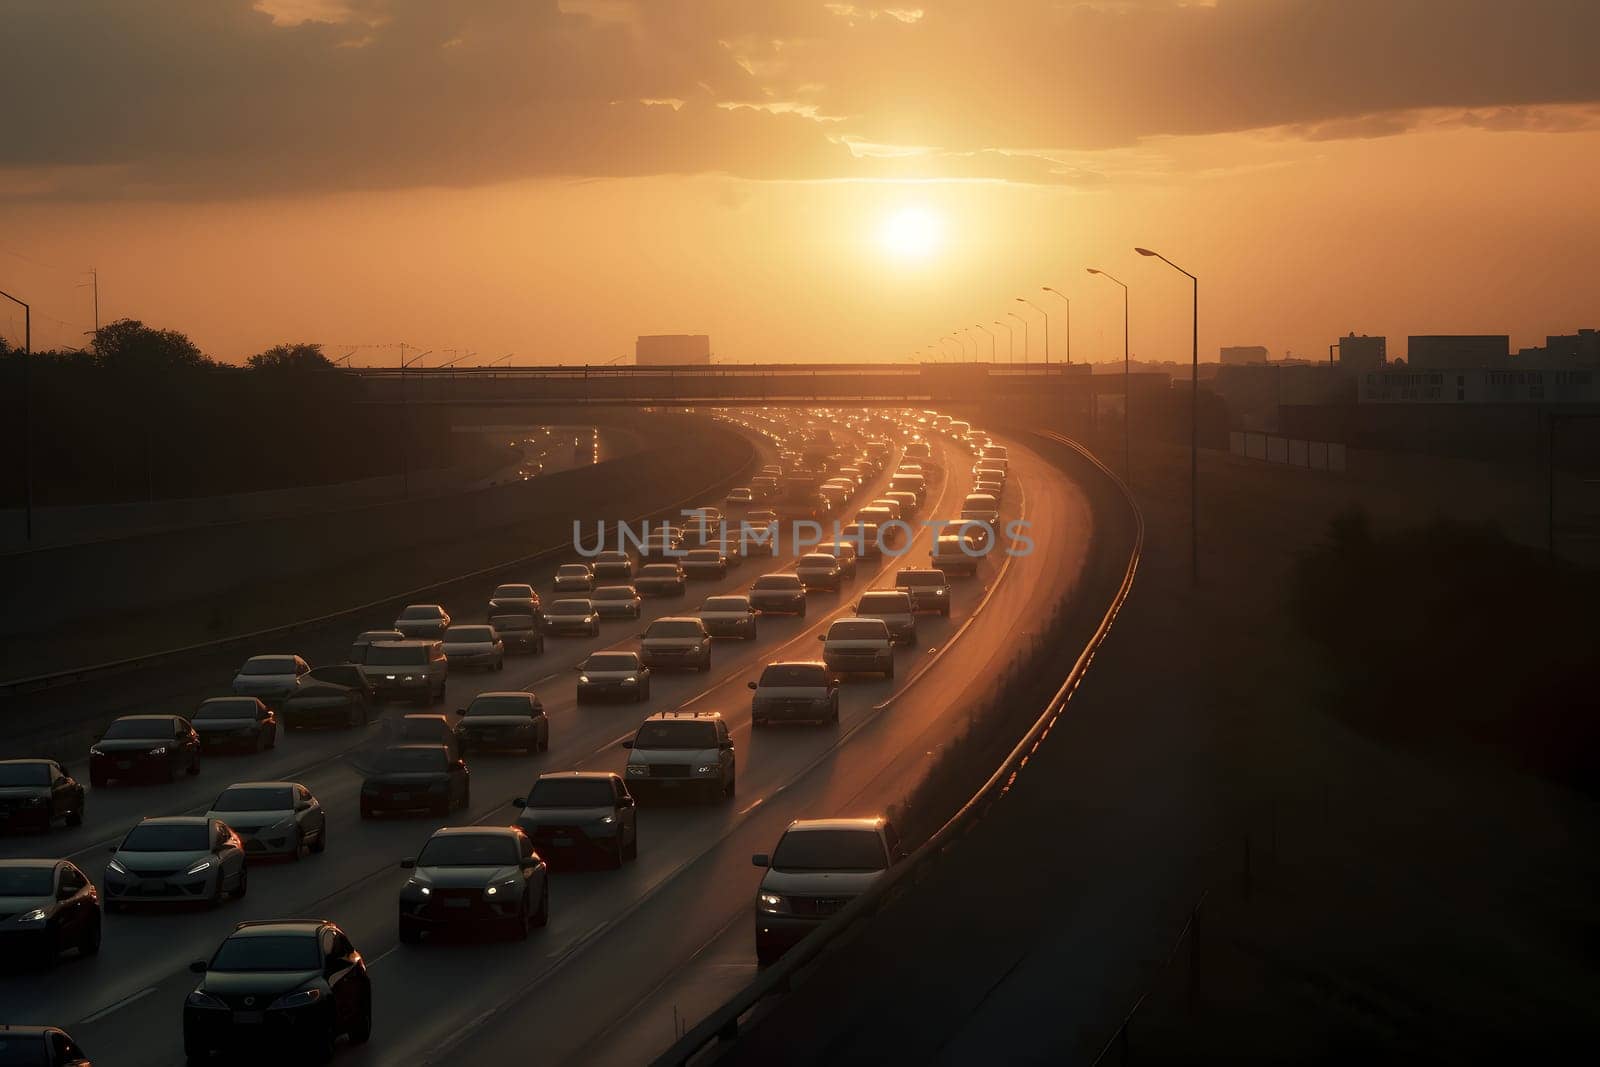 highway traffic in sunrise or sunset. Neural network generated in May 2023. Not based on any actual person, scene or pattern.